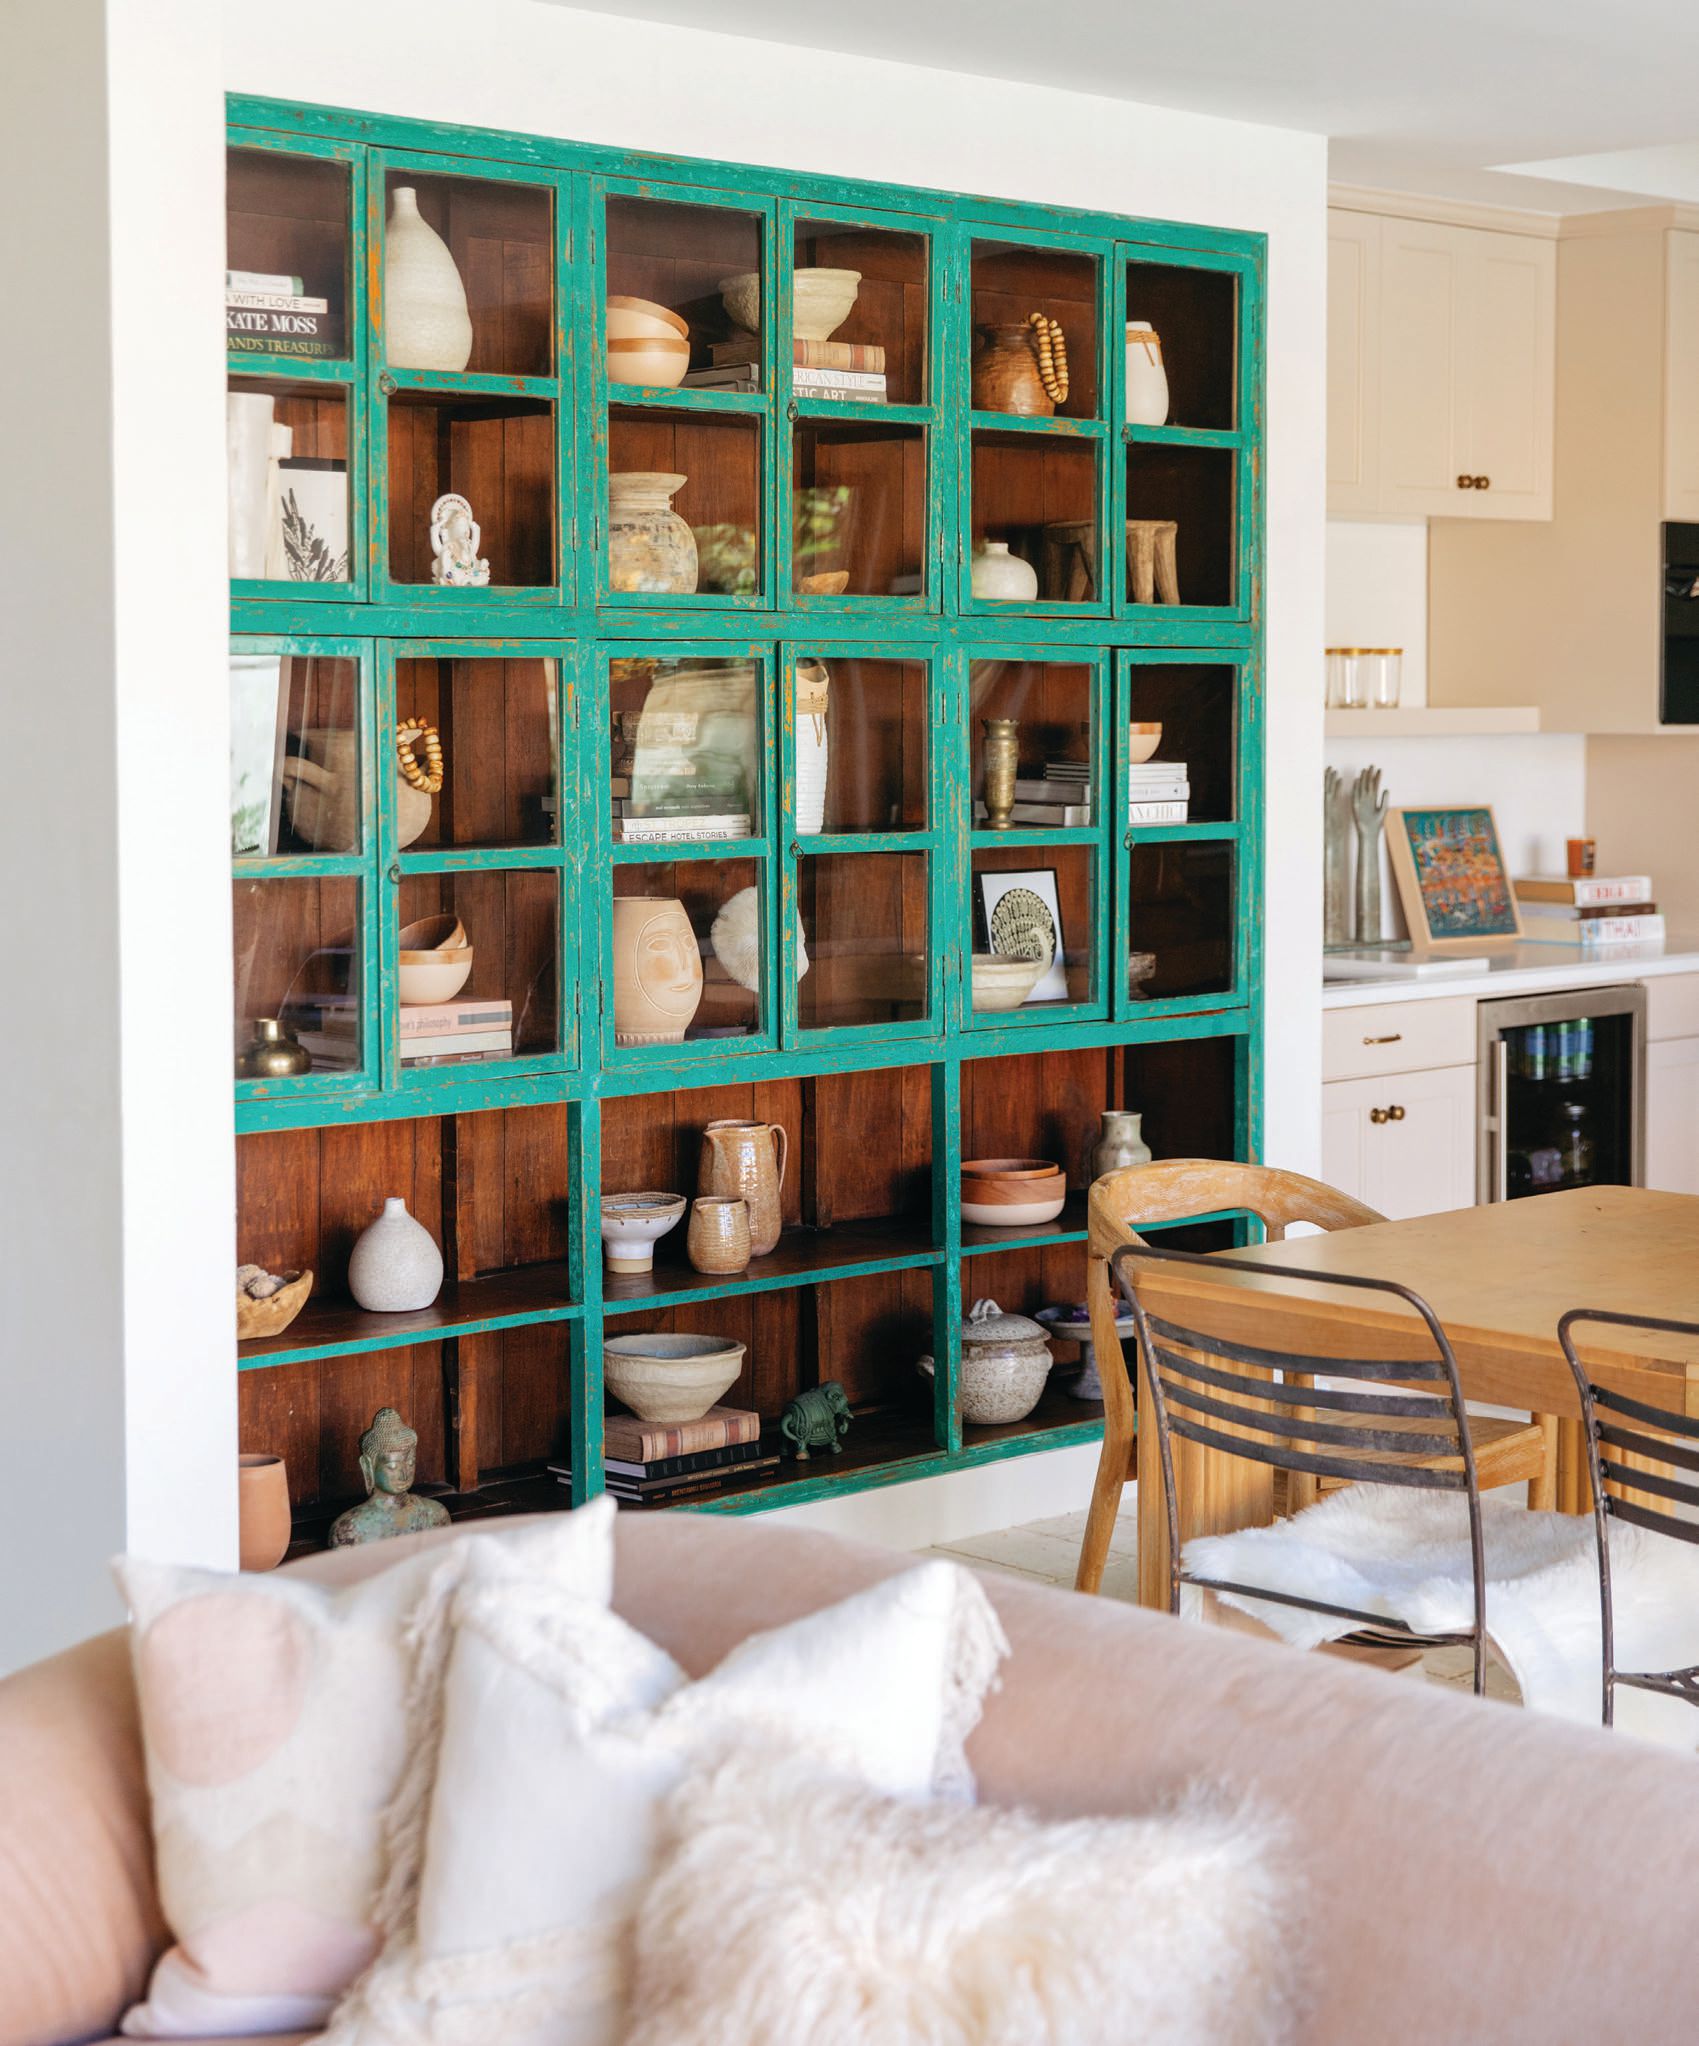 A large turquoise cabinet from Bali is built into one of the kitchen walls. PHOTO COURTESY OF ANGELA O’BRIEN